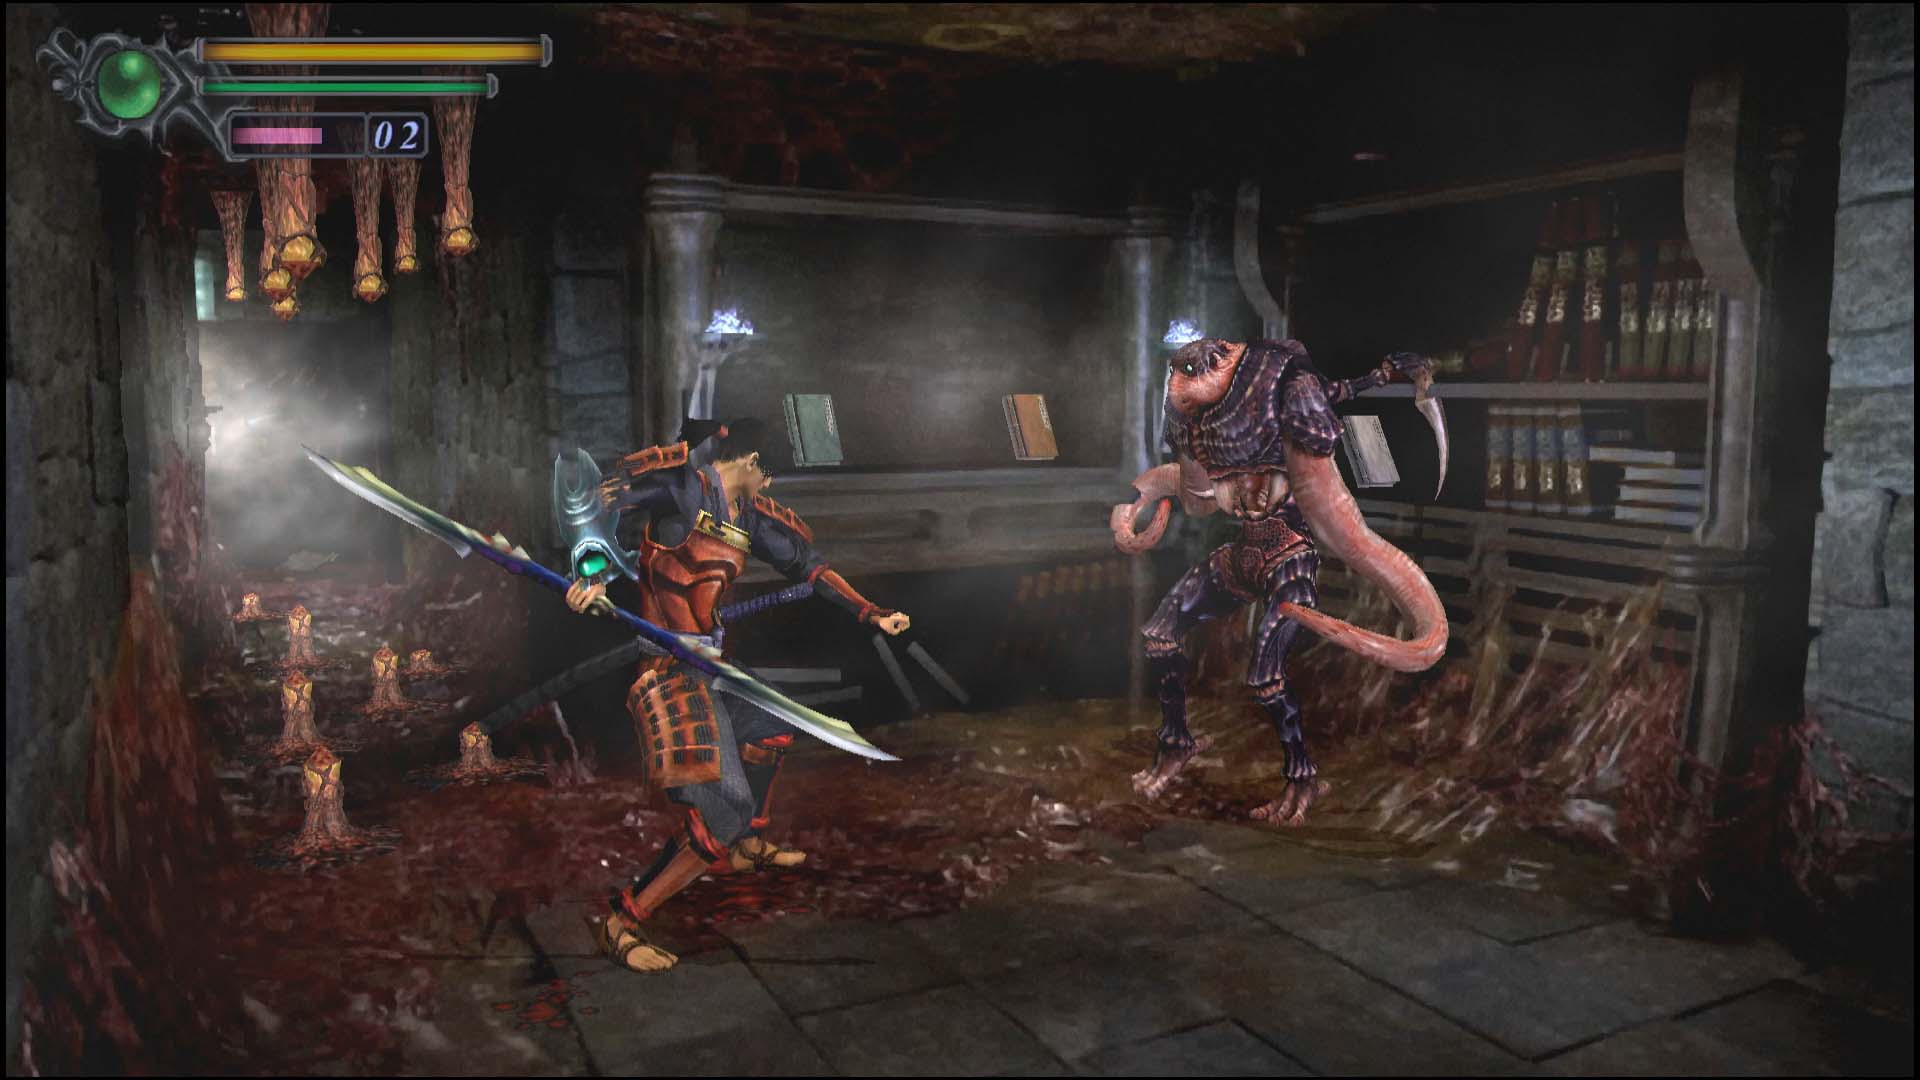 Onimusha Warlords Remastered announced for PS Xbox One, PC